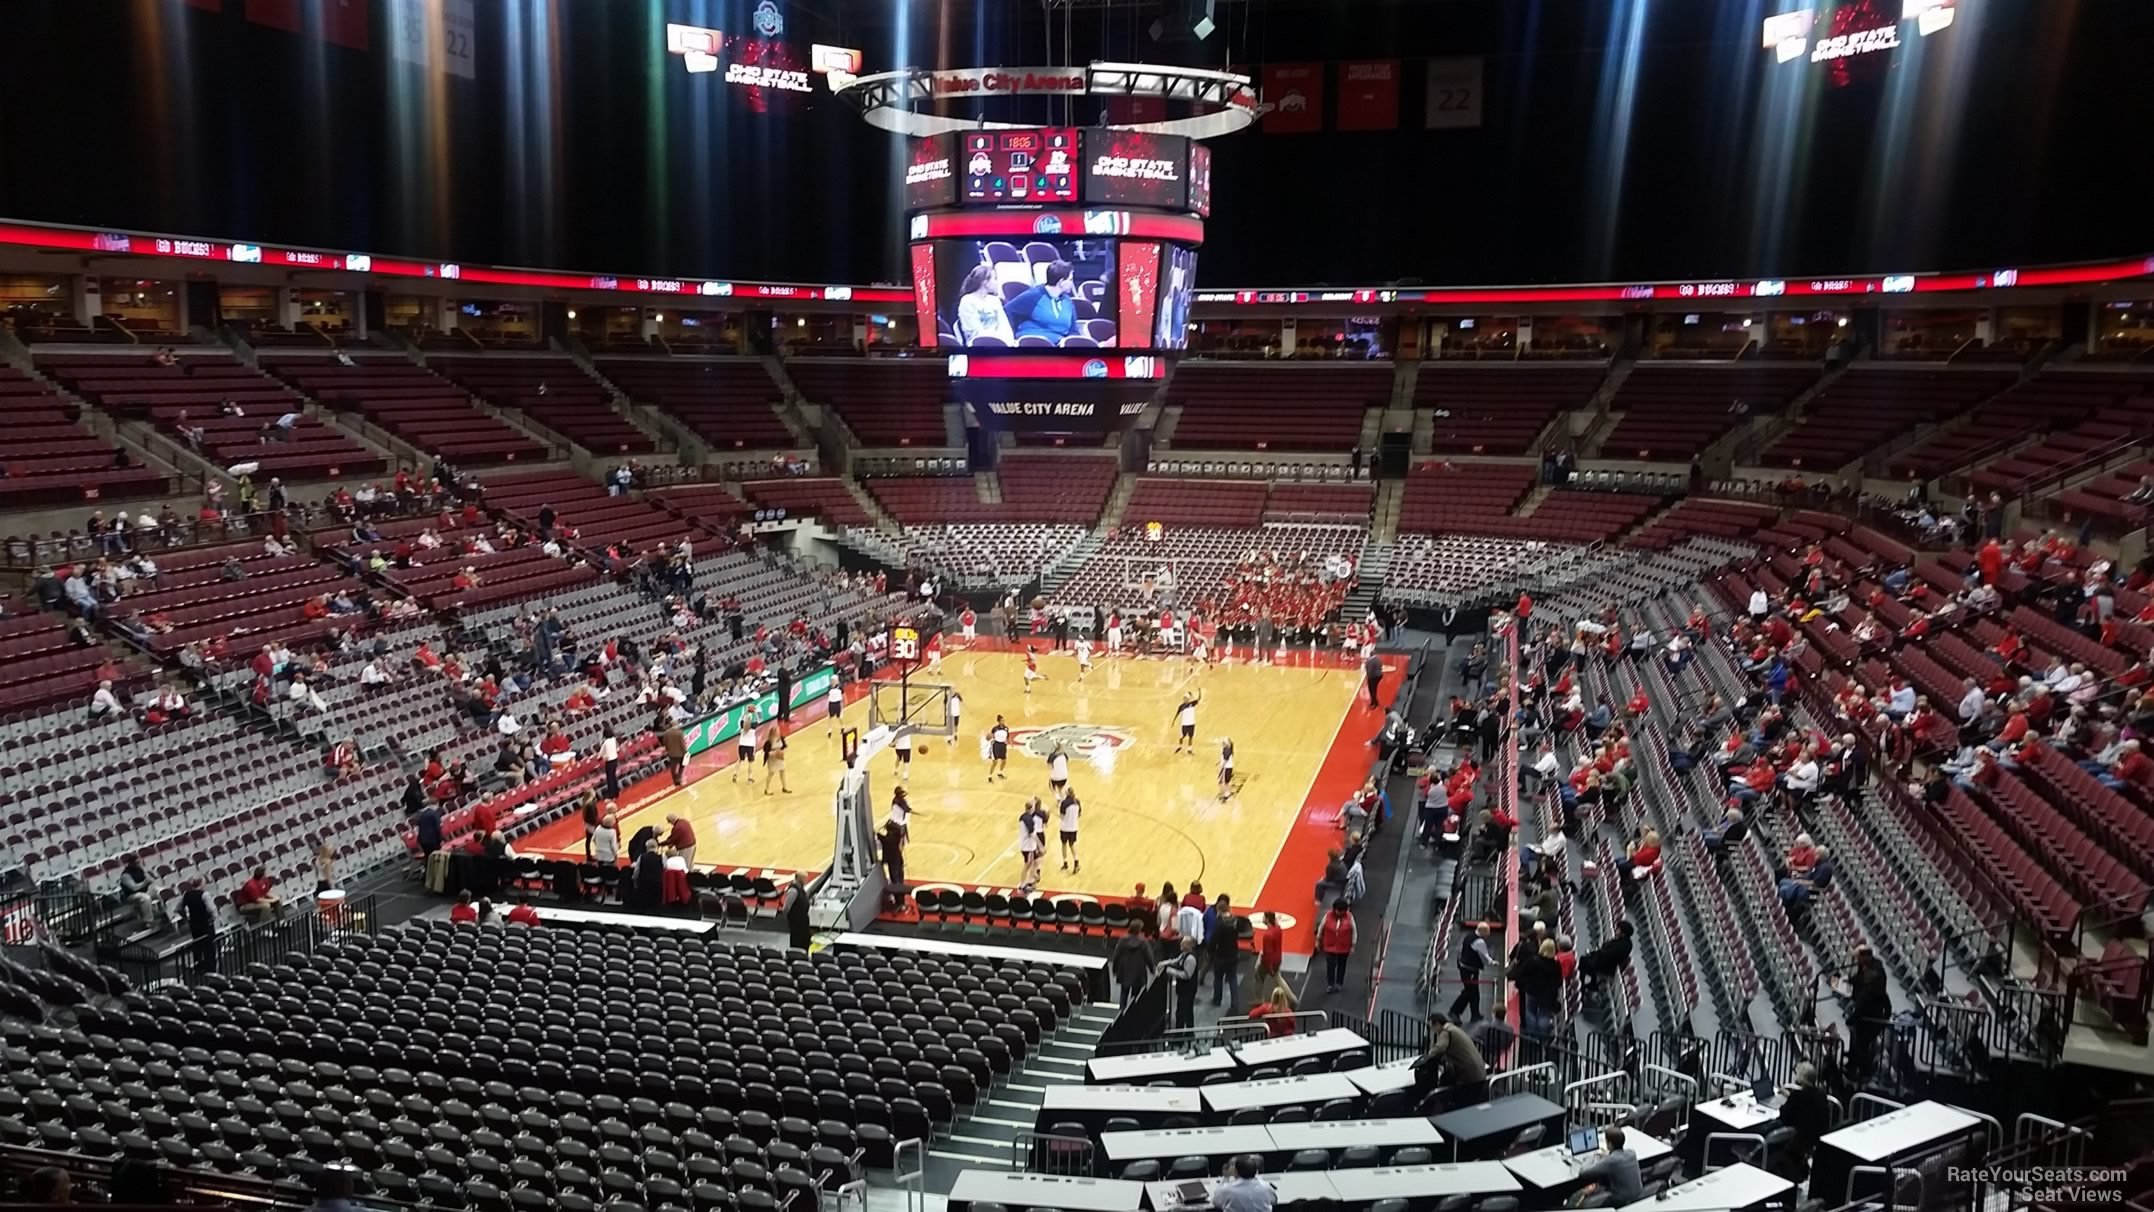 section 230, row h seat view  for basketball - schottenstein center